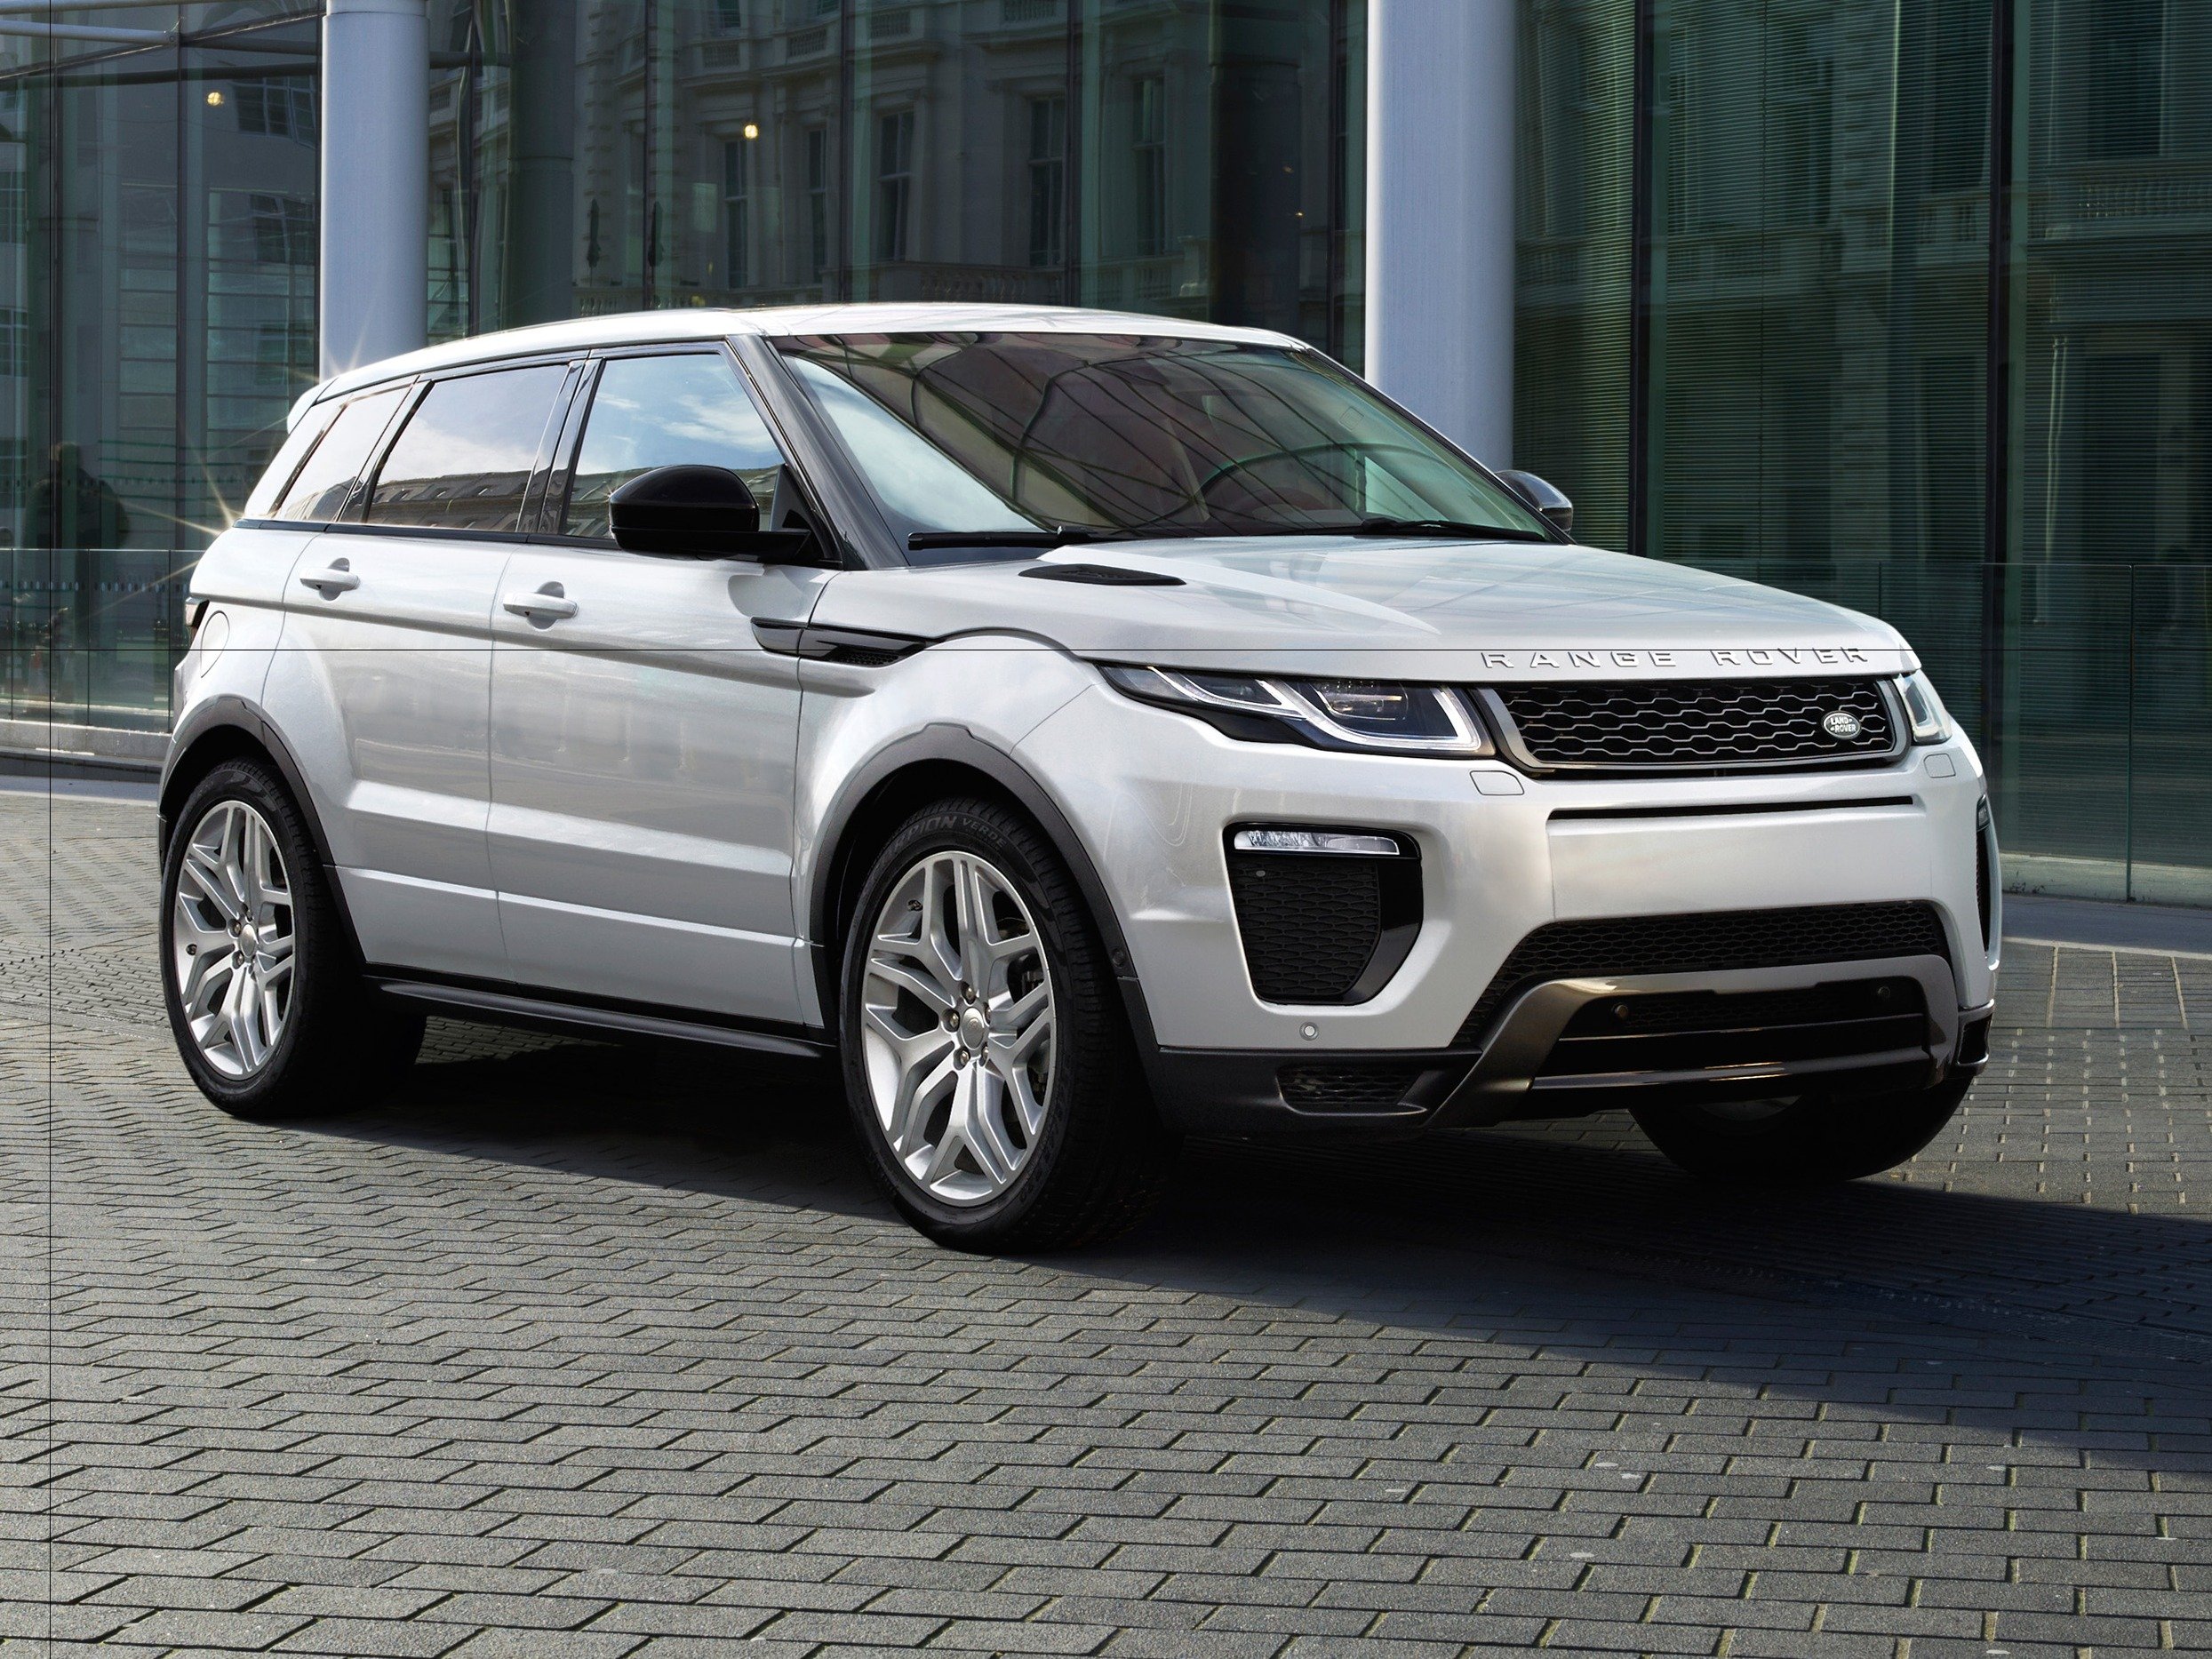 The Real Thing: Land Rover's Evoque SUV starts at about $65,000 Image: Land Rover